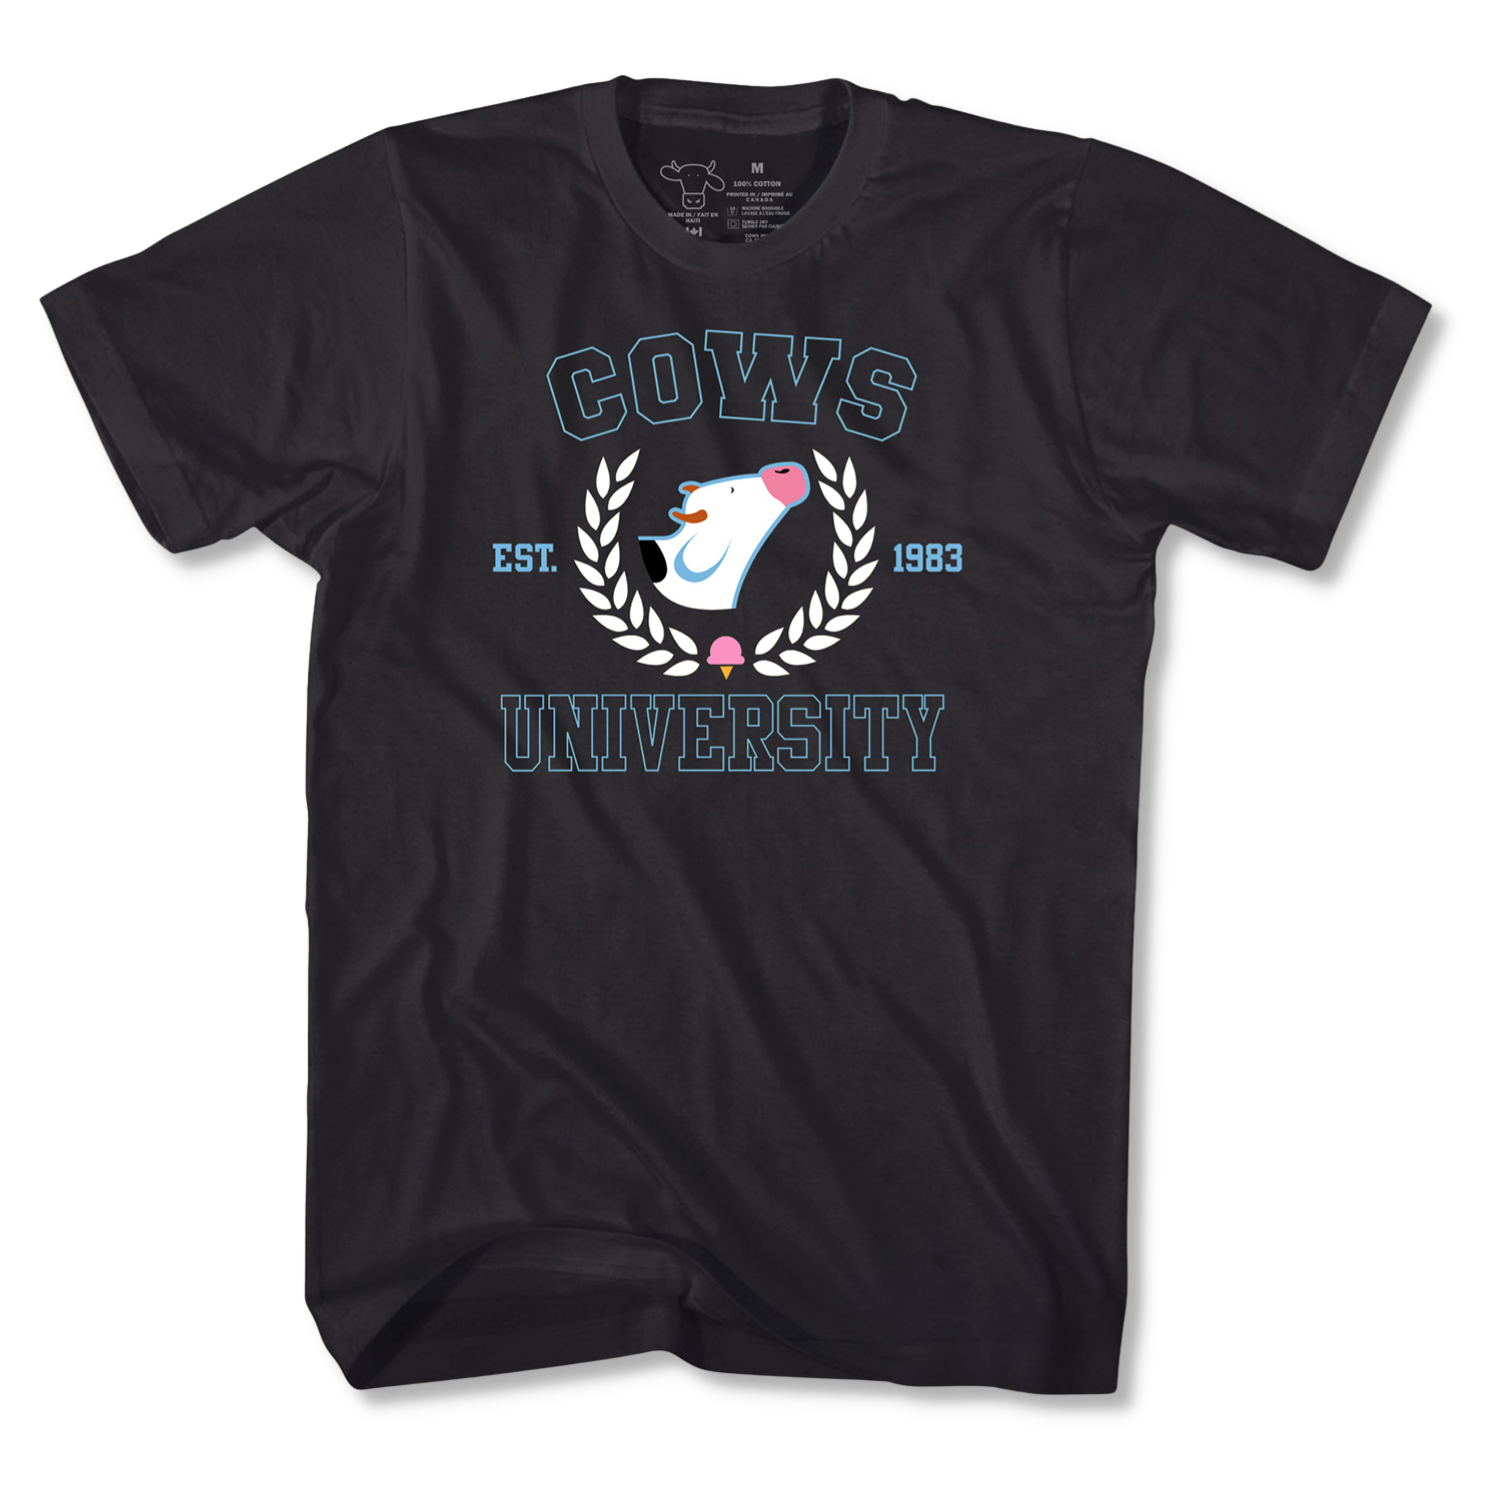 COWS University Adult/Youth/Kids T